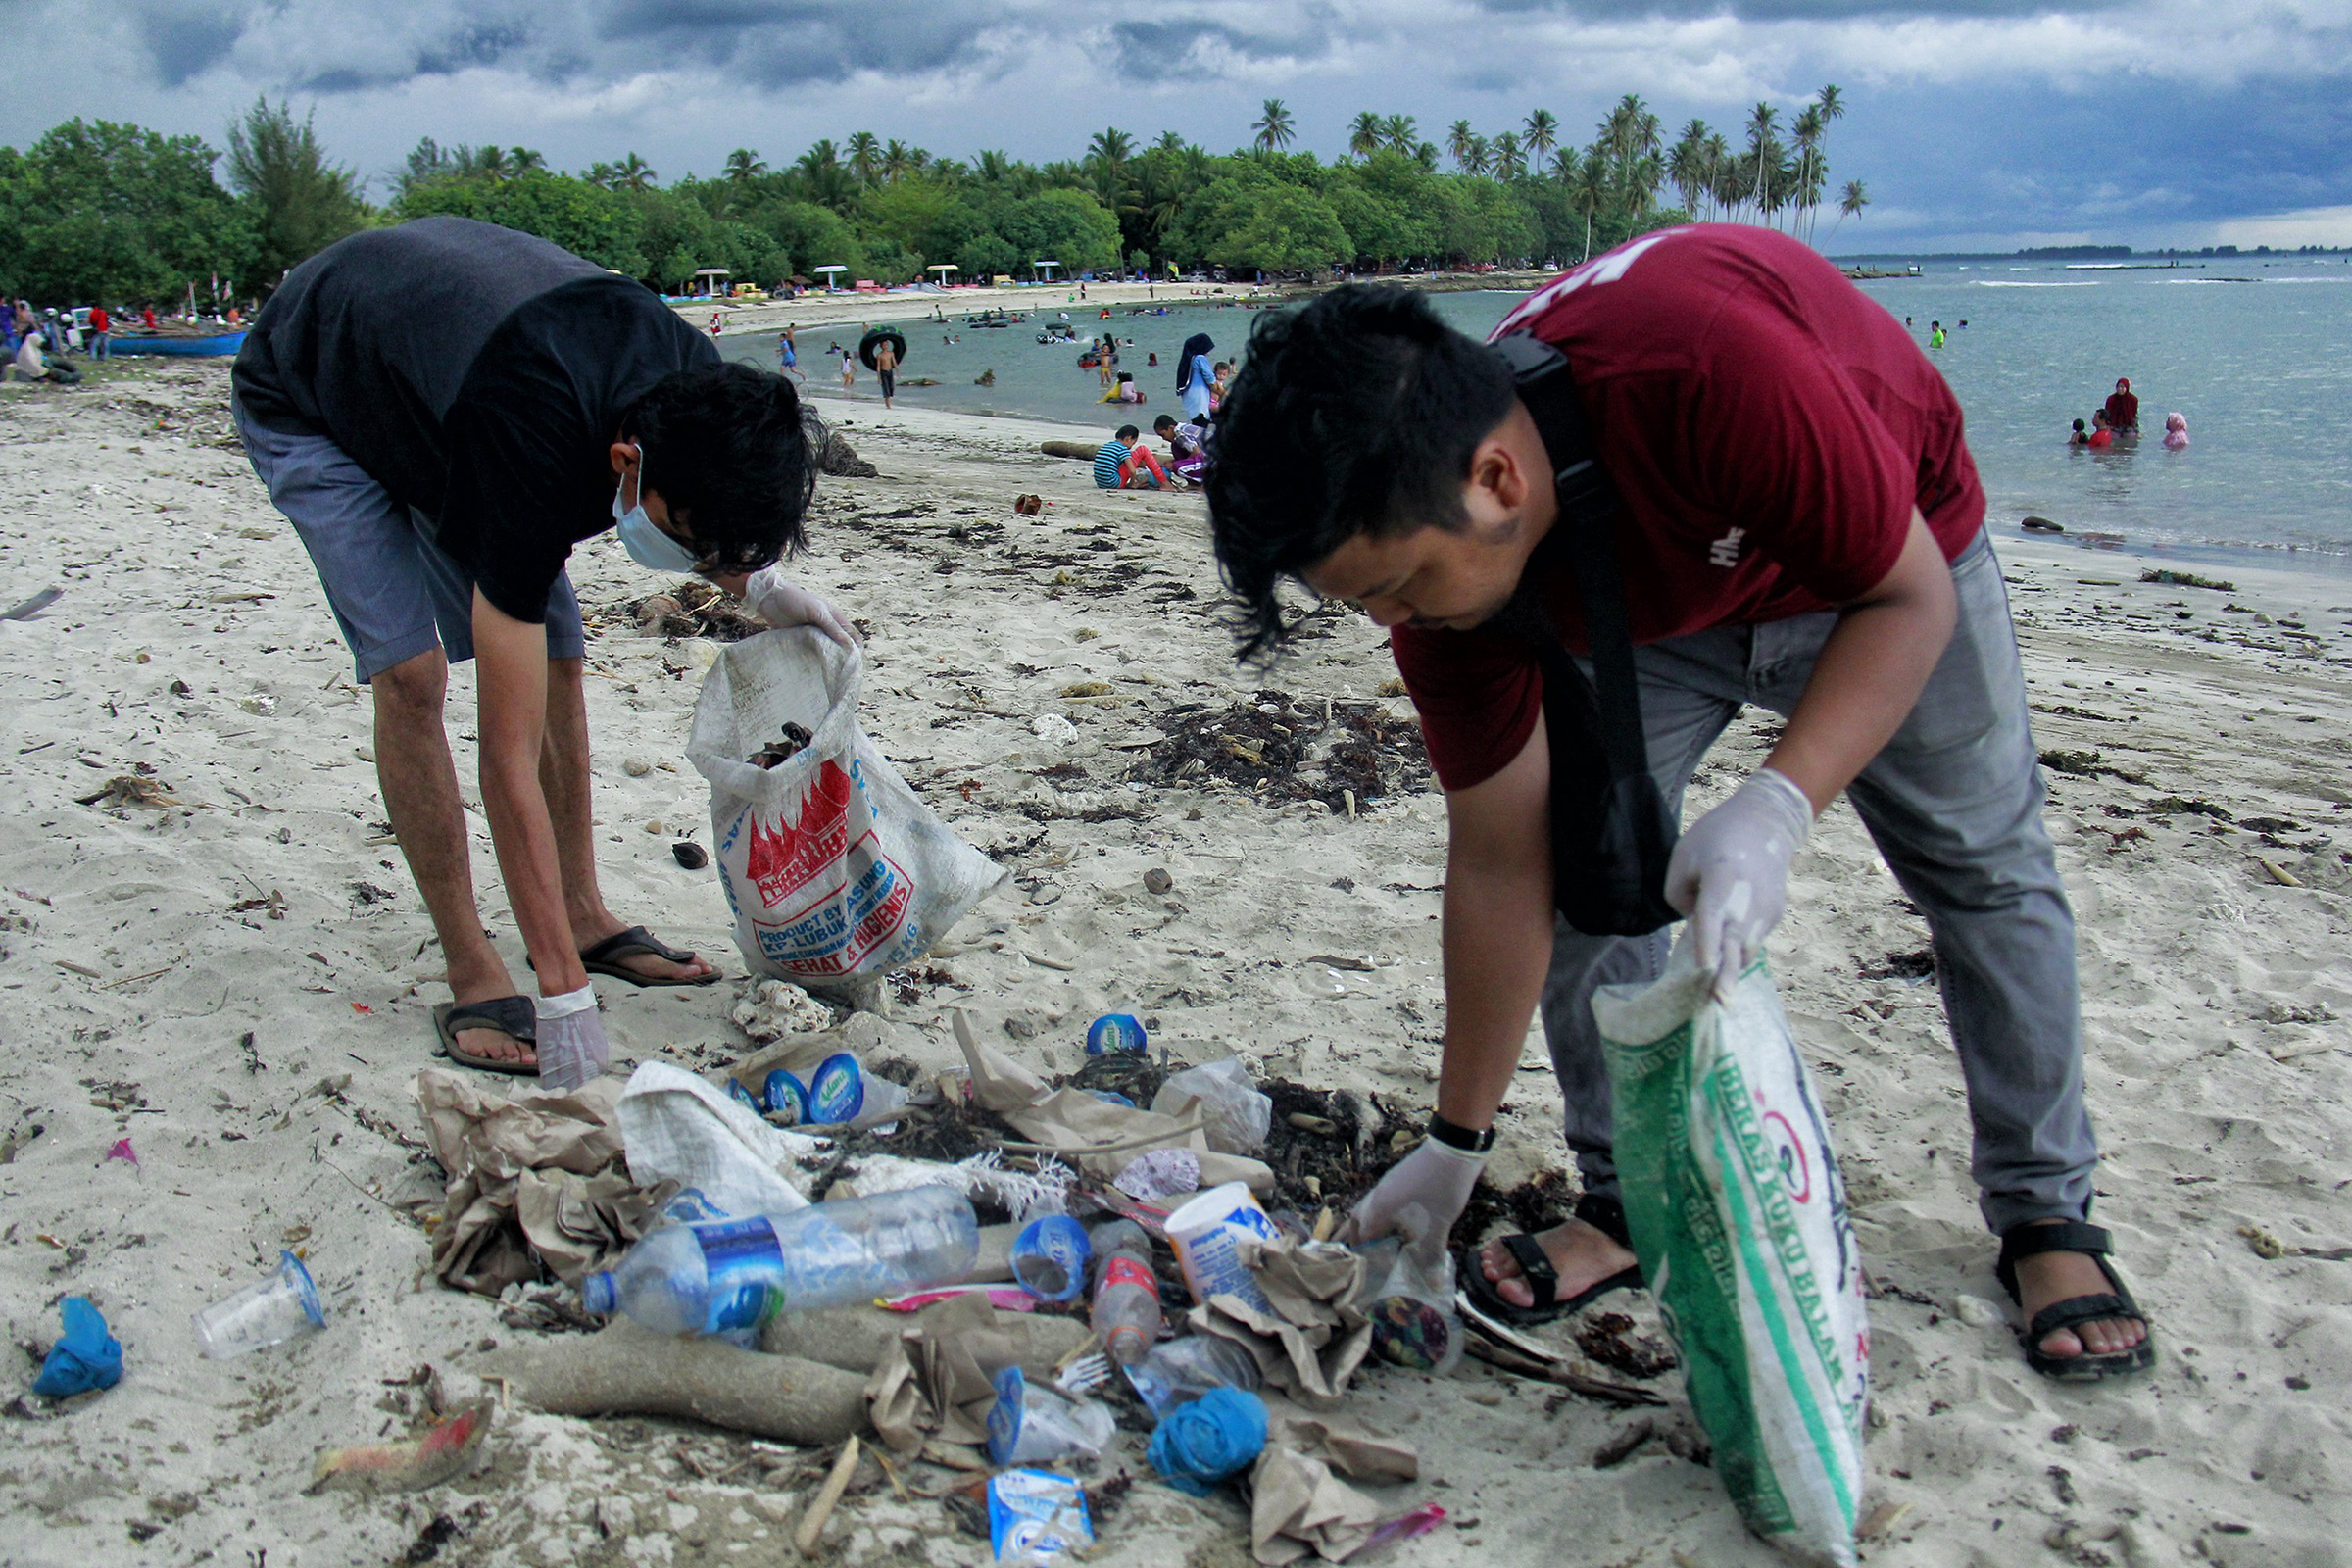 Students cleanup in Meulaboh, Indonesia - 18 Aug 2019